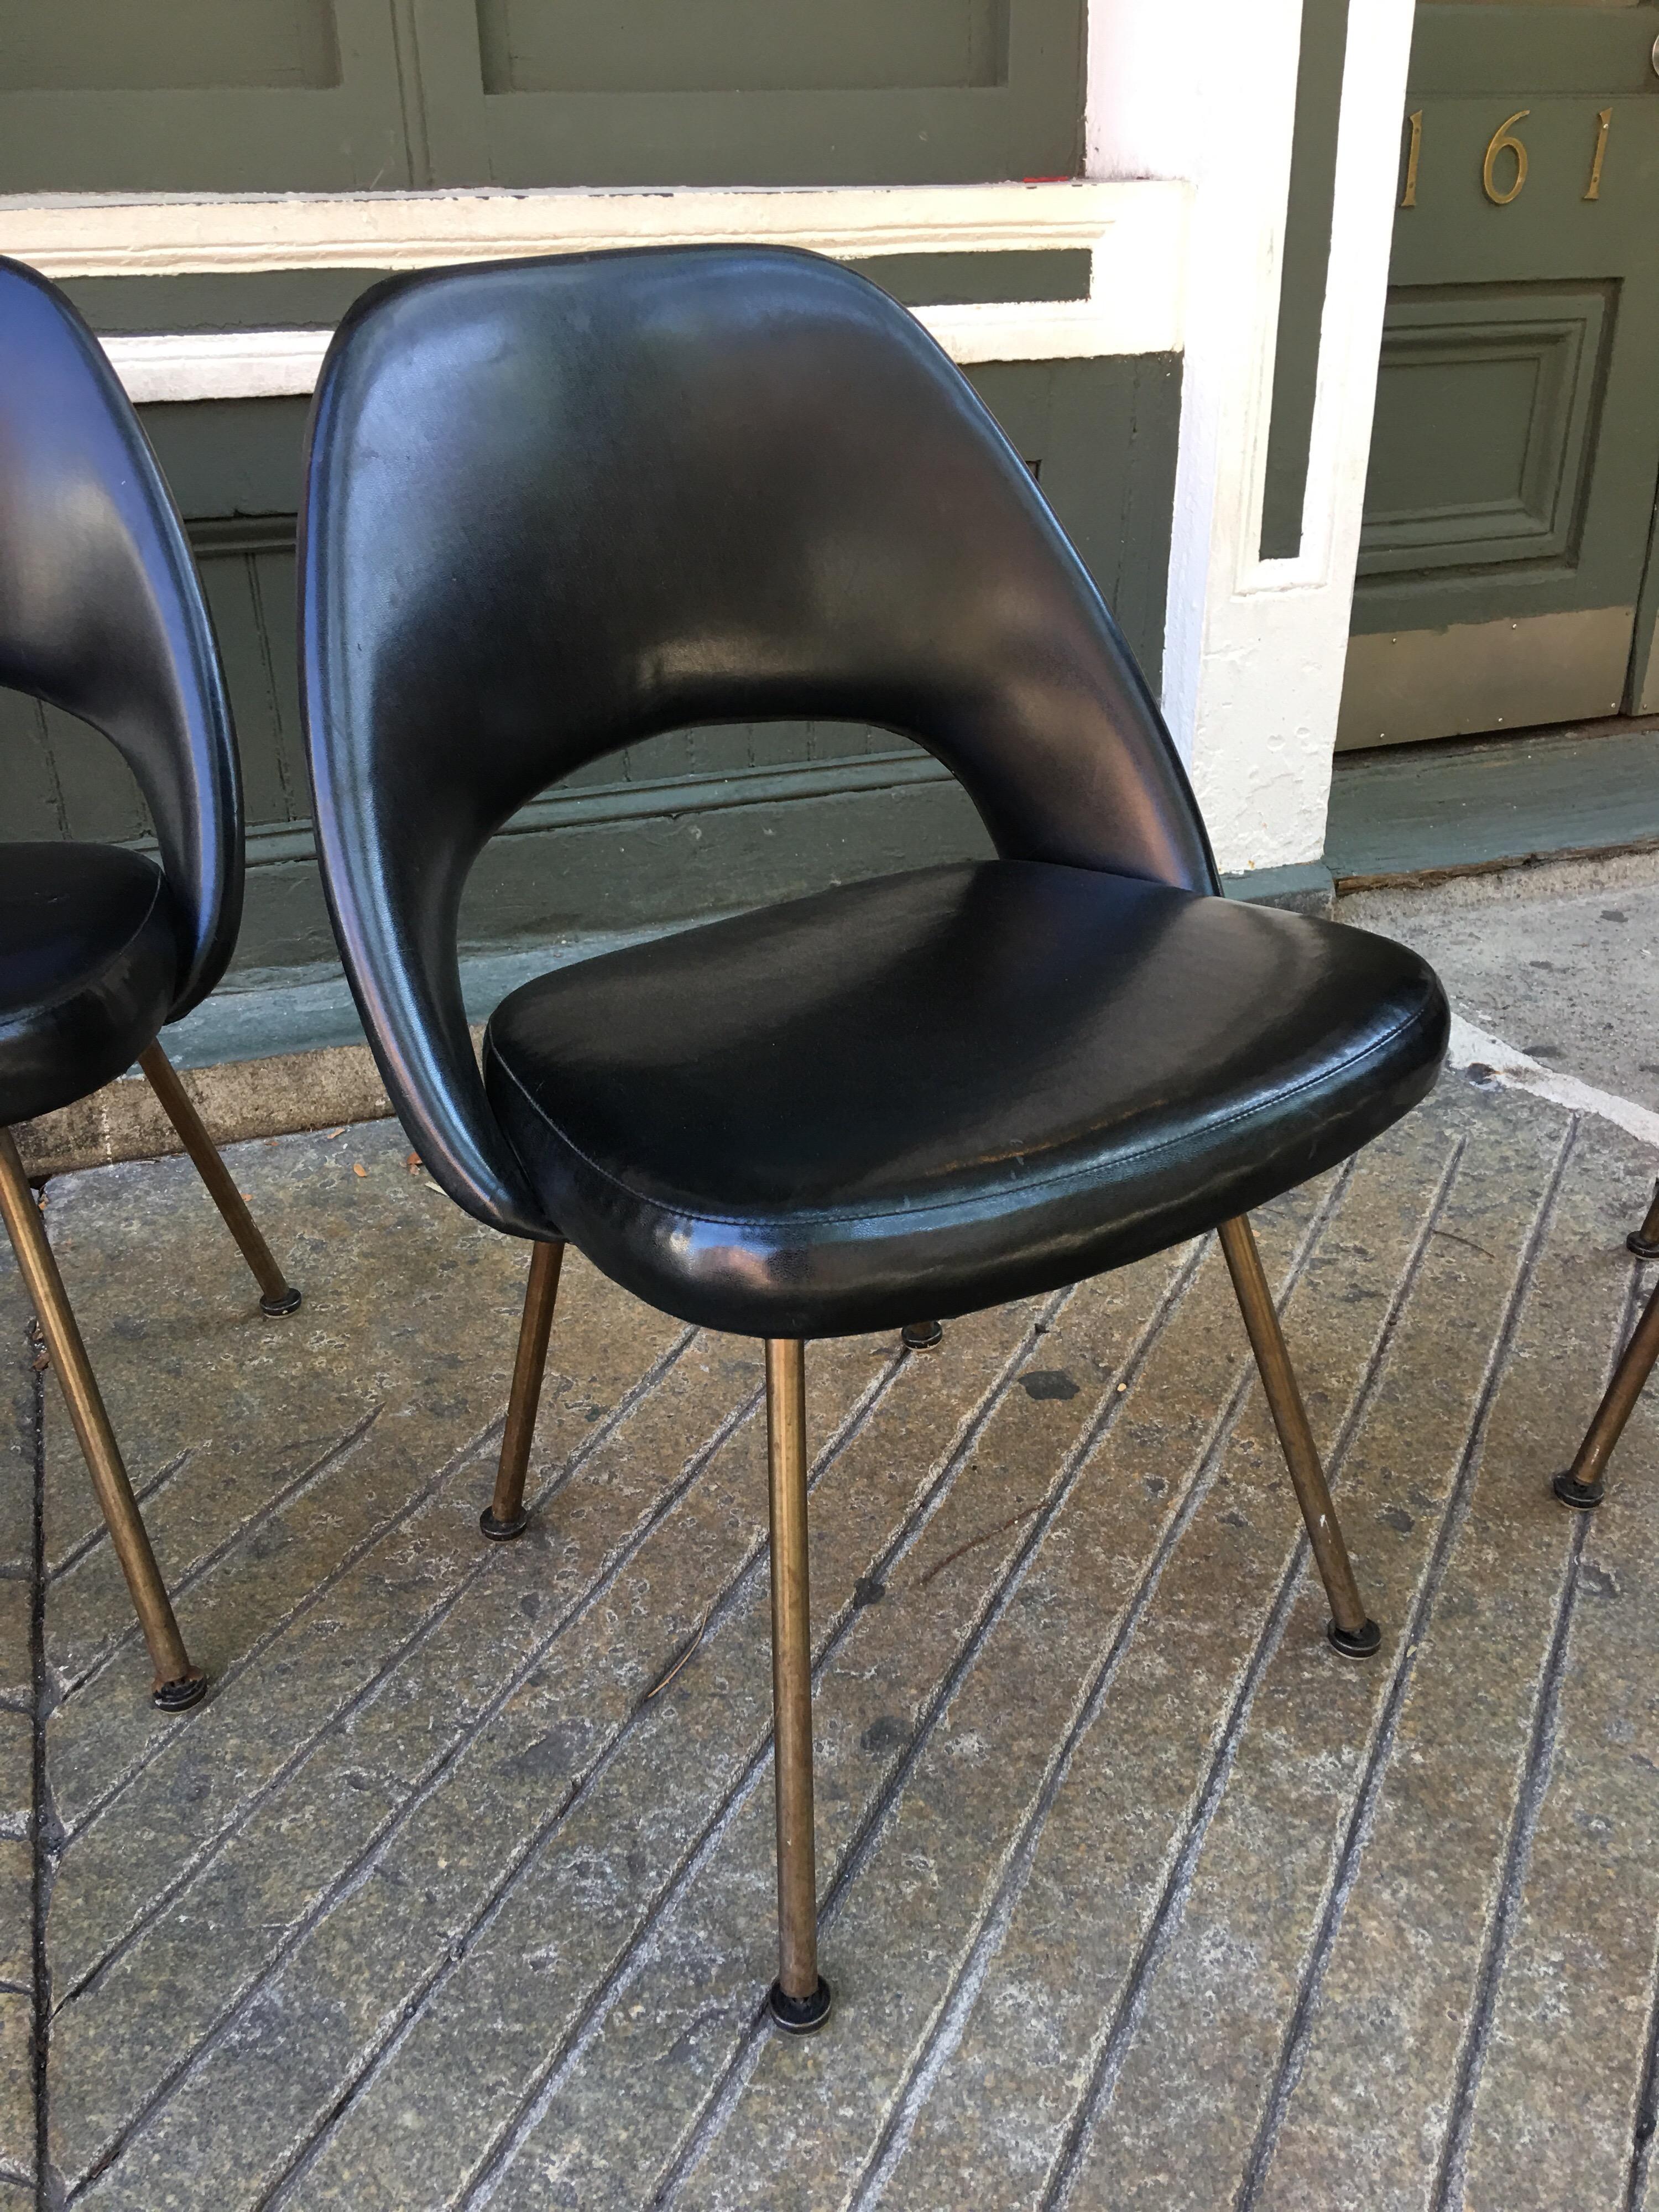 Saarinen for Knoll set of 4 black vinyl chairs with rare original bronze finish legs. Offered originally for a short time in the 1960s legs have a brownish finish. Black vinyl is the original and shows some wear, including a couple pictured slits in